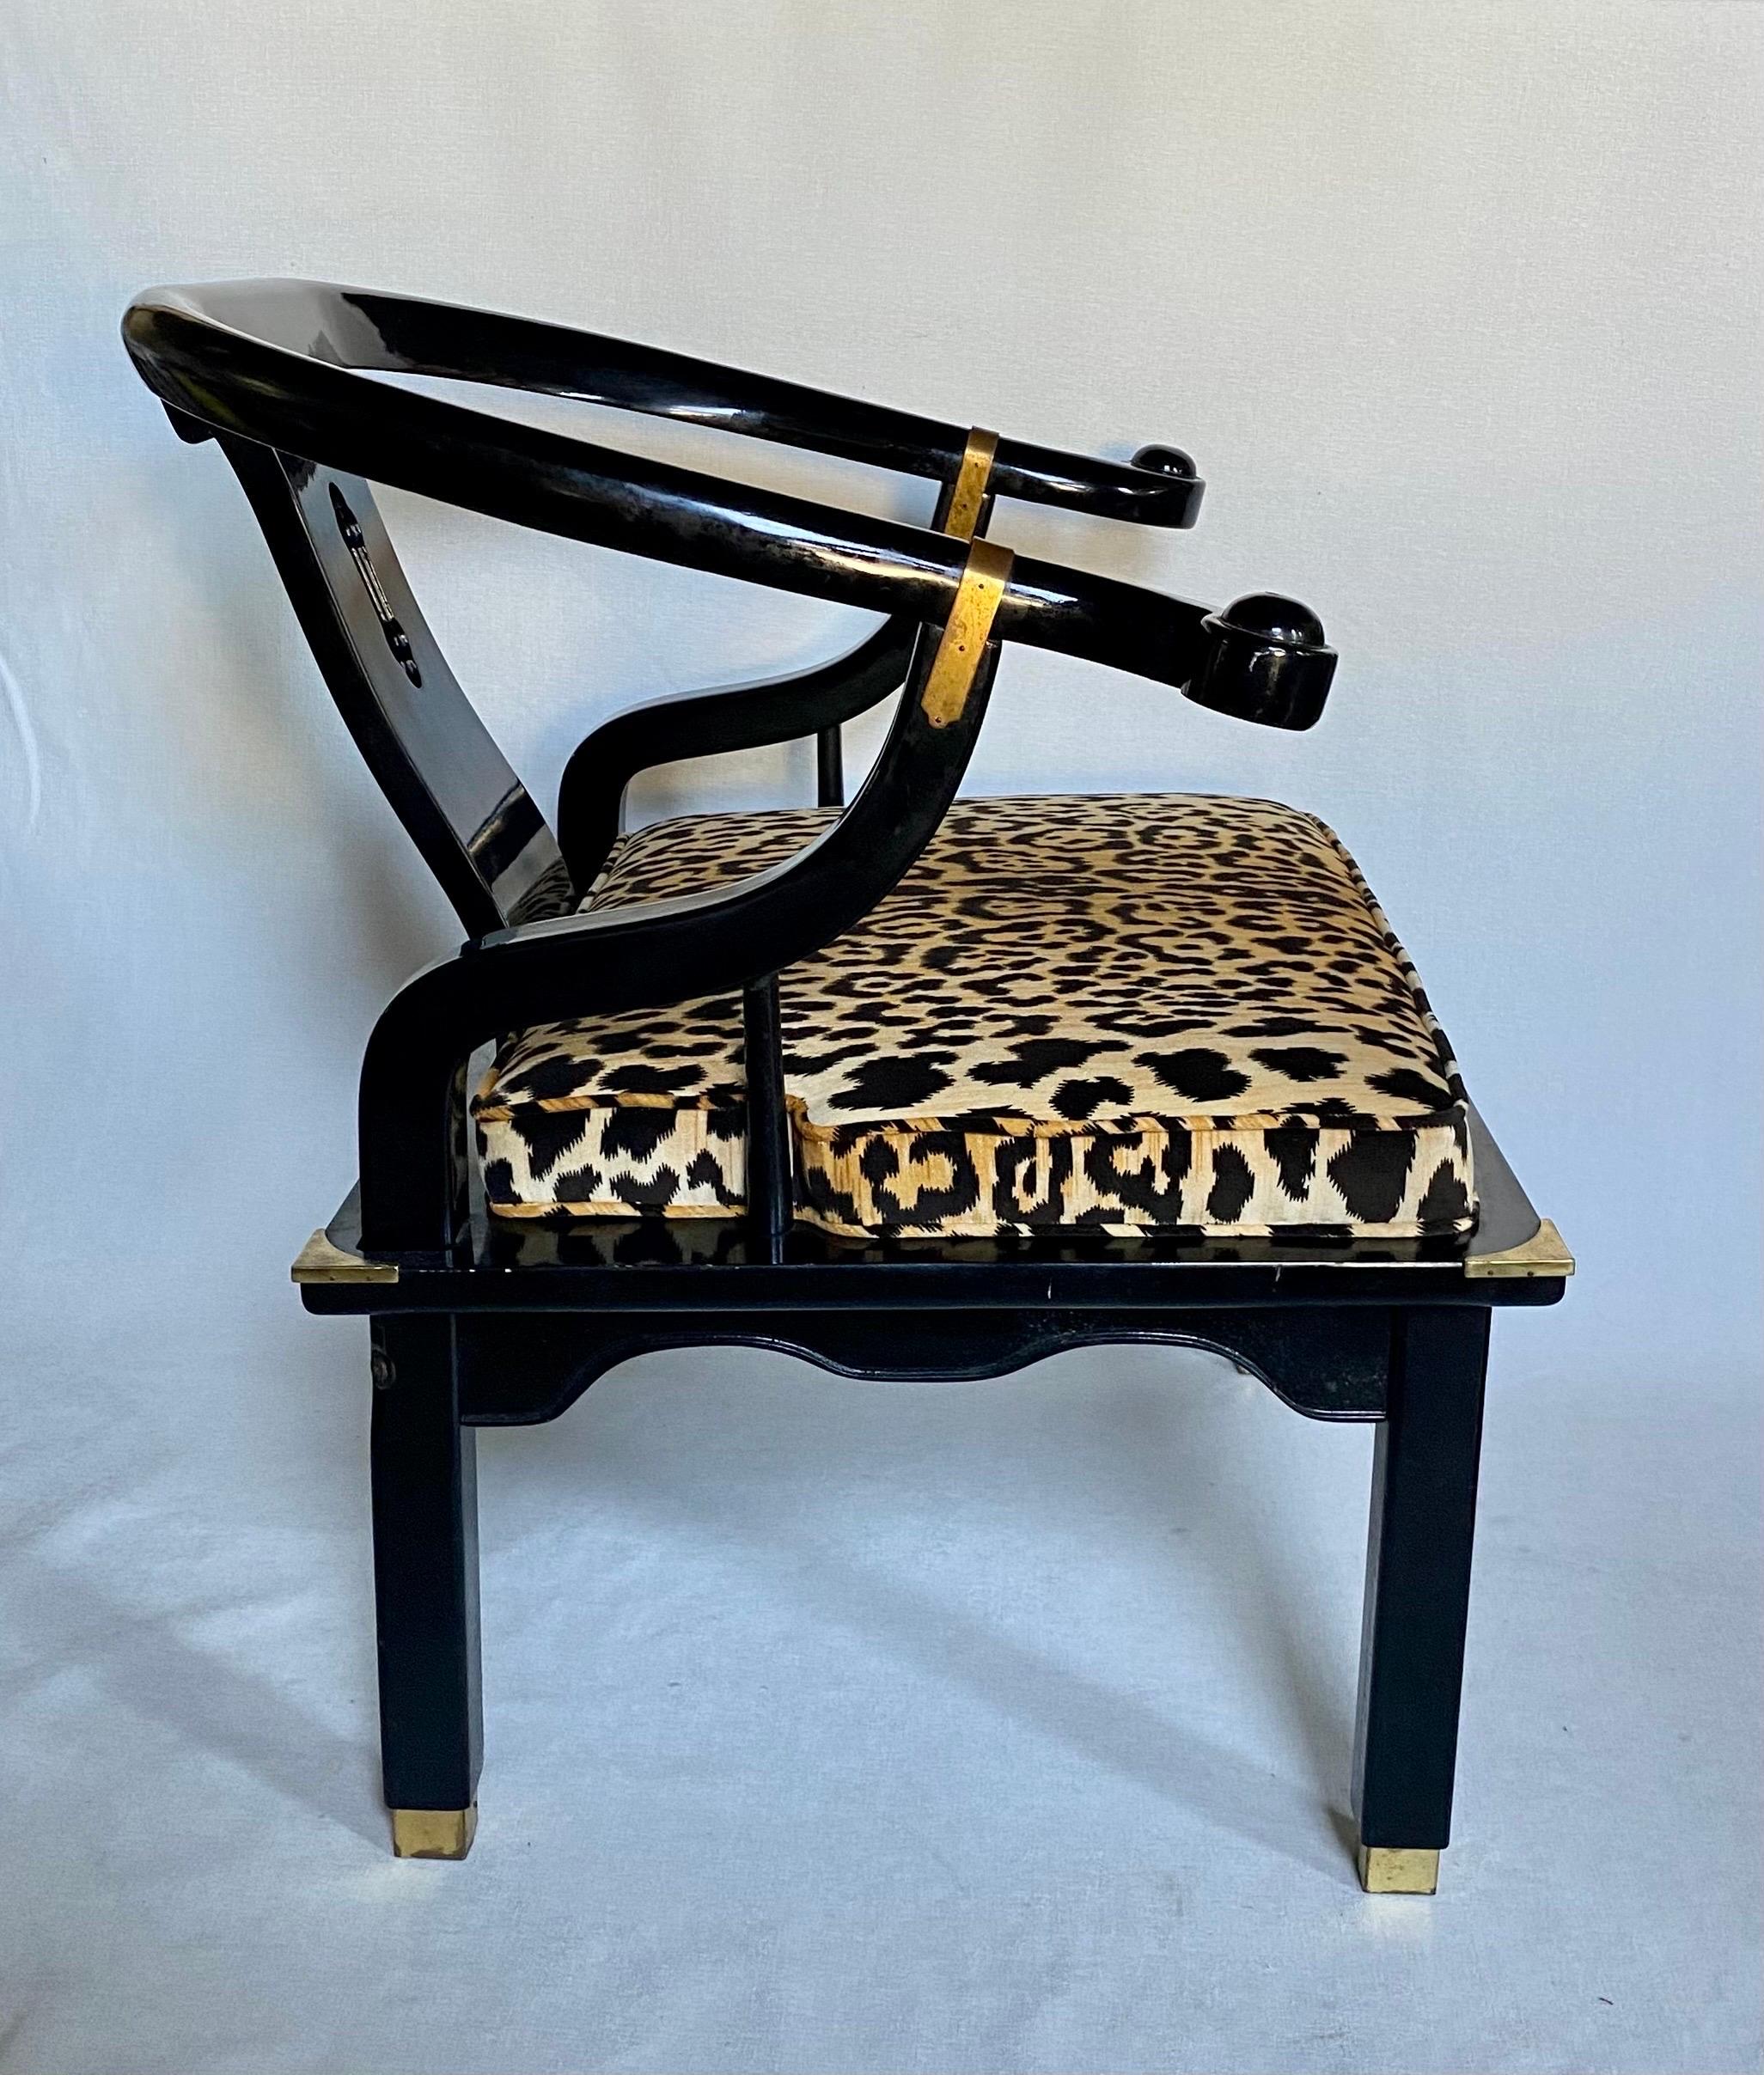 Hollywood Regency style lounge accent chair by Century Furniture. This James Mont style armchair features a gloss black lacquer wood frame with brass hardware accents. Cushion is newly upholstered in a cotton-velvet animal print fabric. 